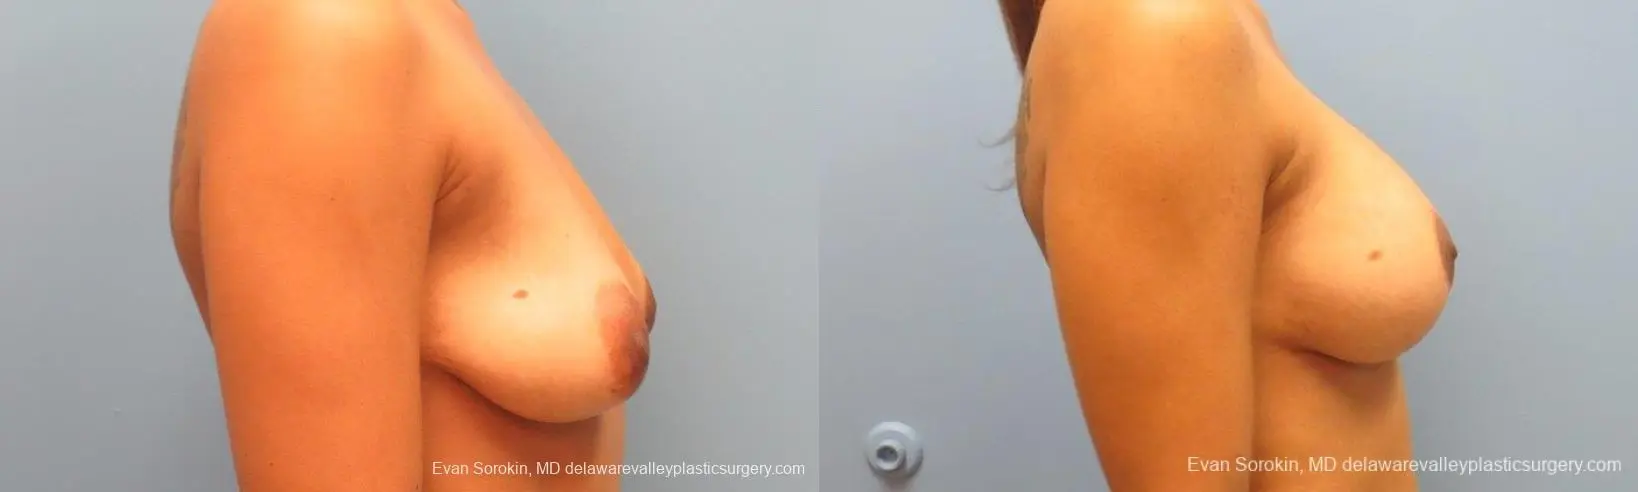 Philadelphia Breast Lift and Augmentation 10119 - Before and After 3